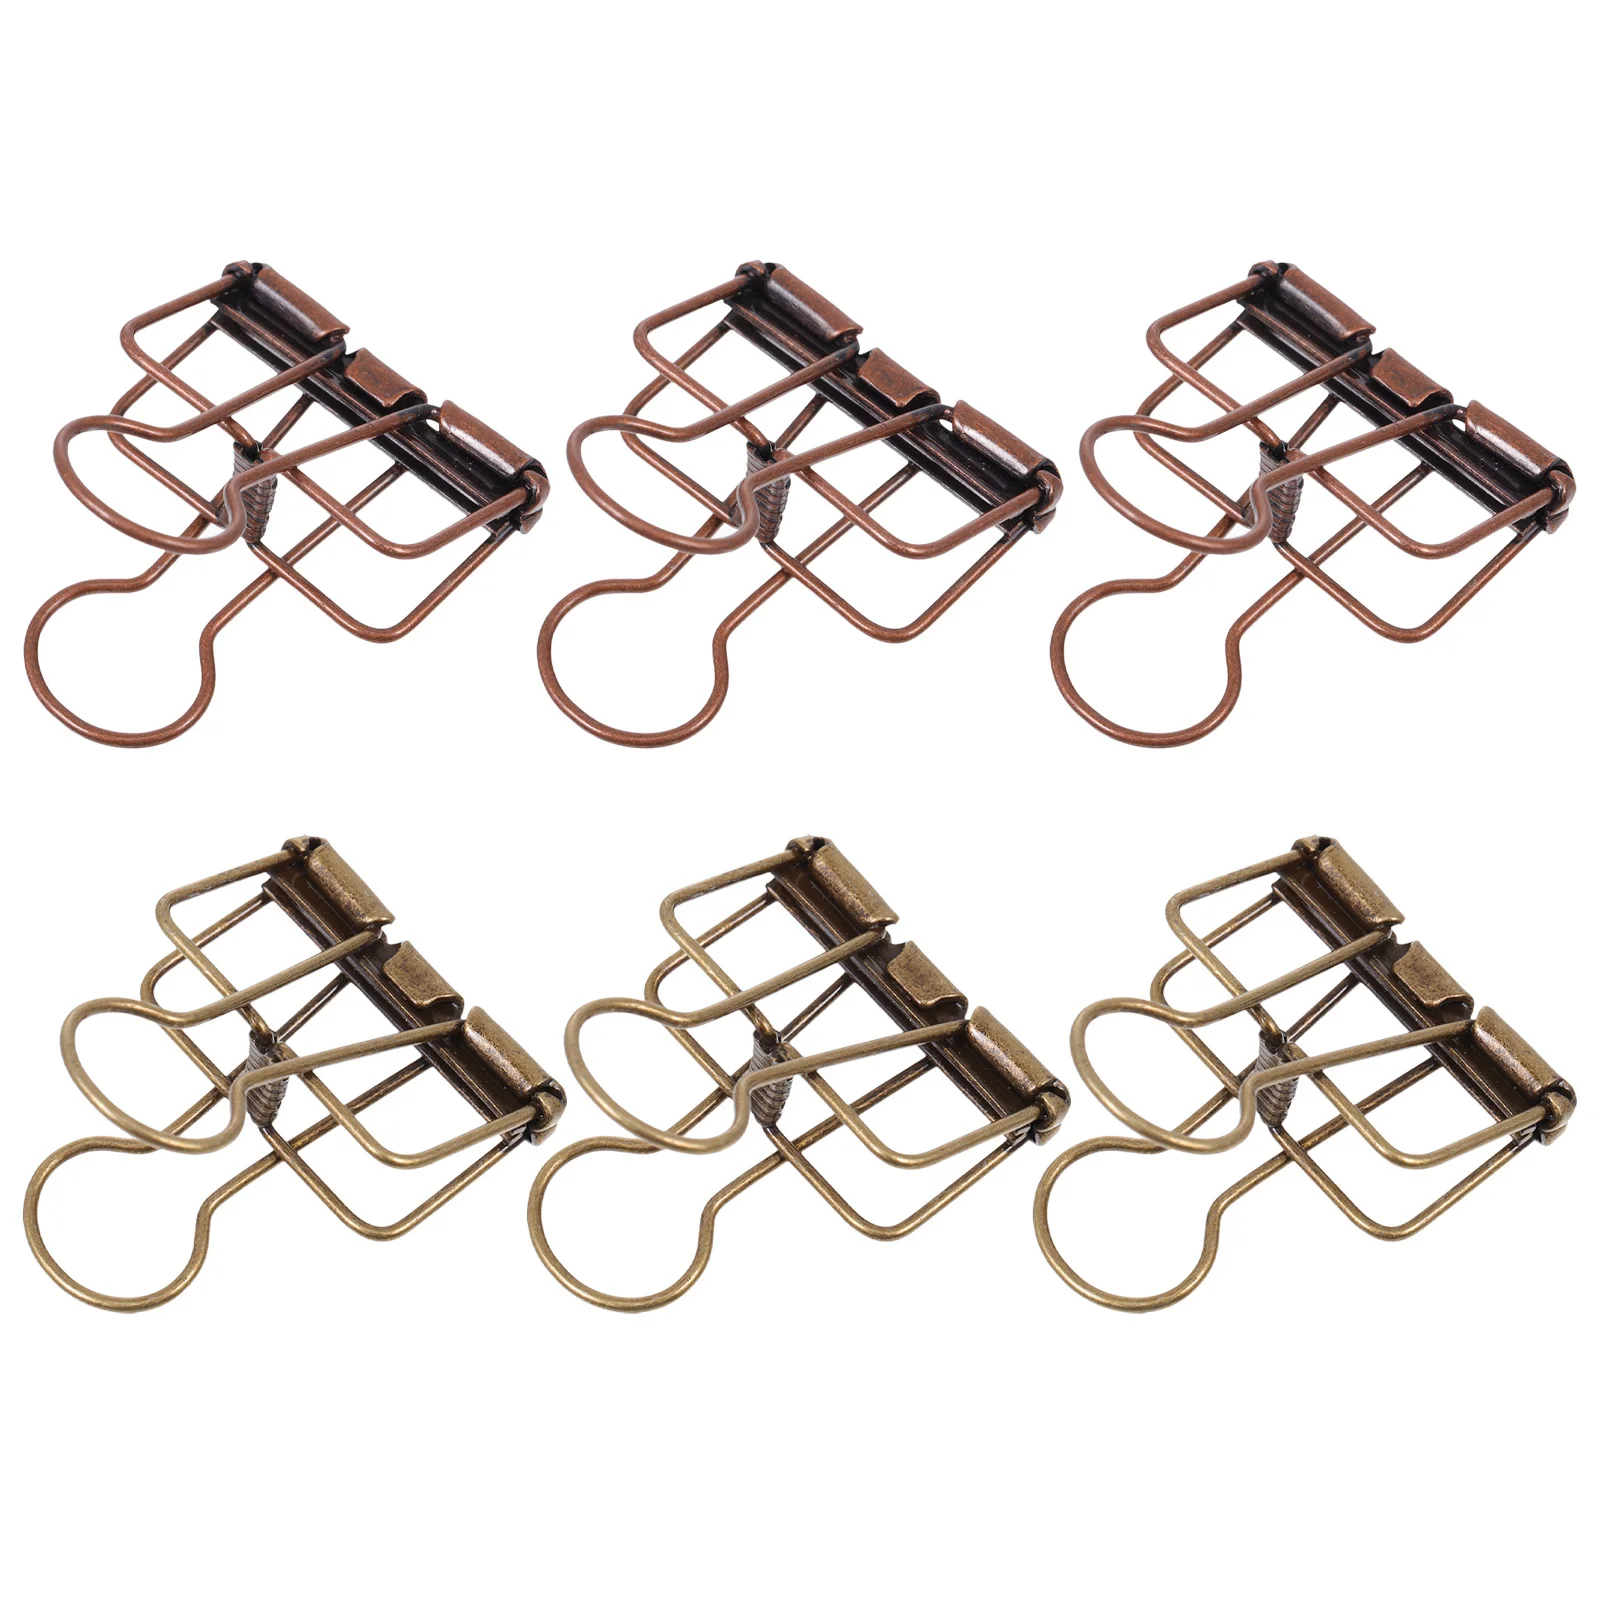 

Clips Binder Paper Metal Office Clamps File Clipretro Jumbosuppliesalligator Large Accessories Papers Wire Document Organizing